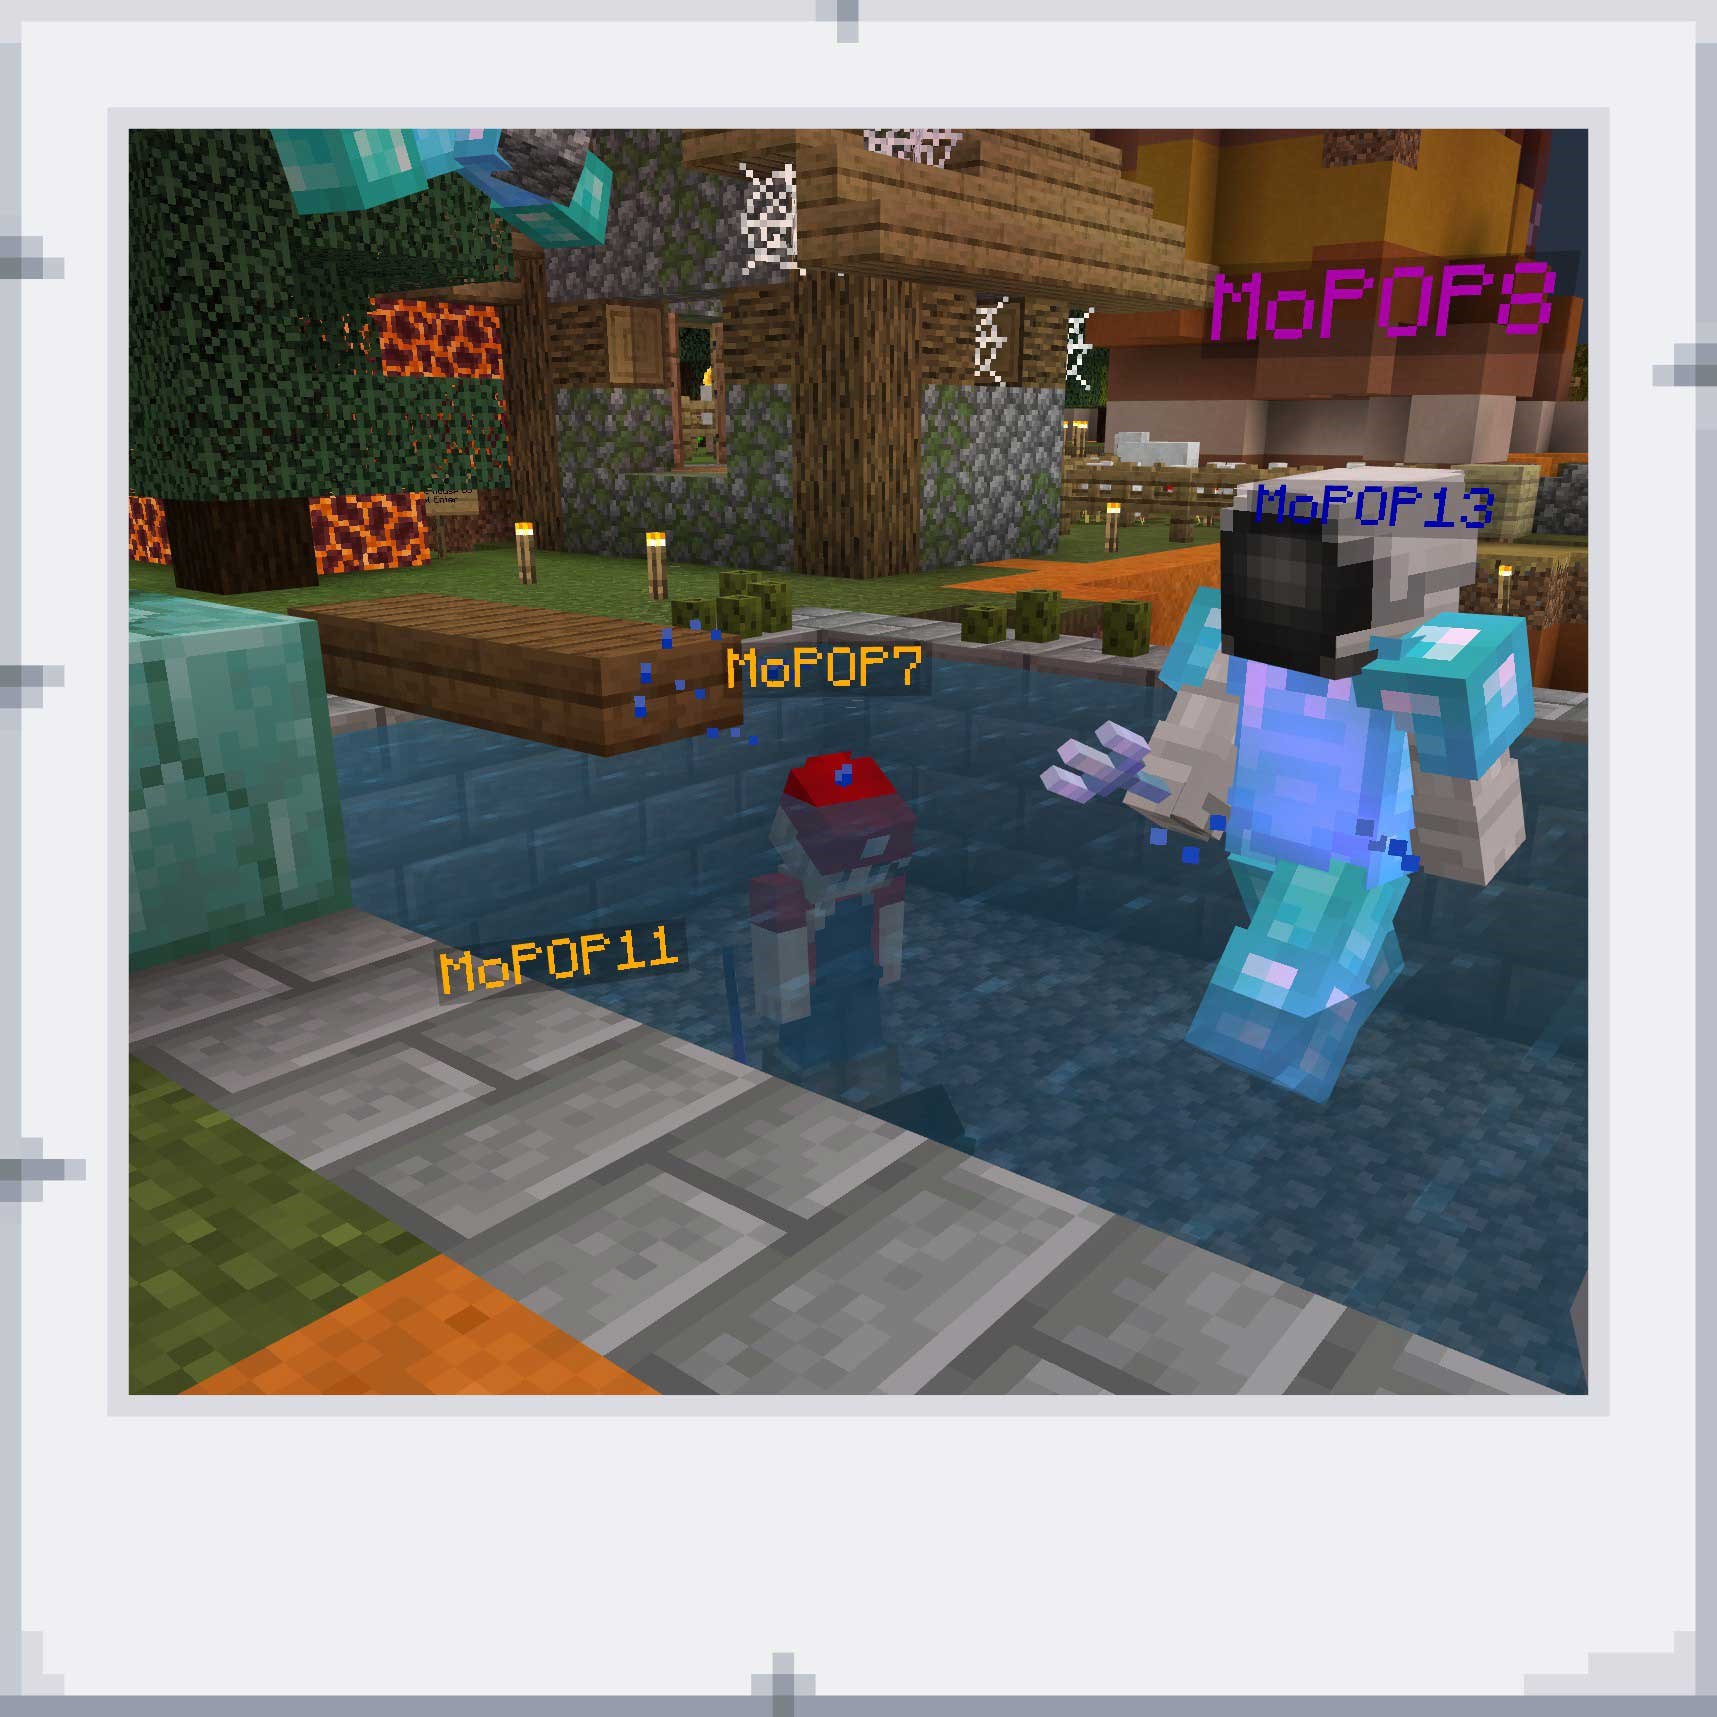 Mopop S Minecraft Virtual Student Club Explores Real World Issues In A Virtual Environment Mopop Museum Of Pop Culture